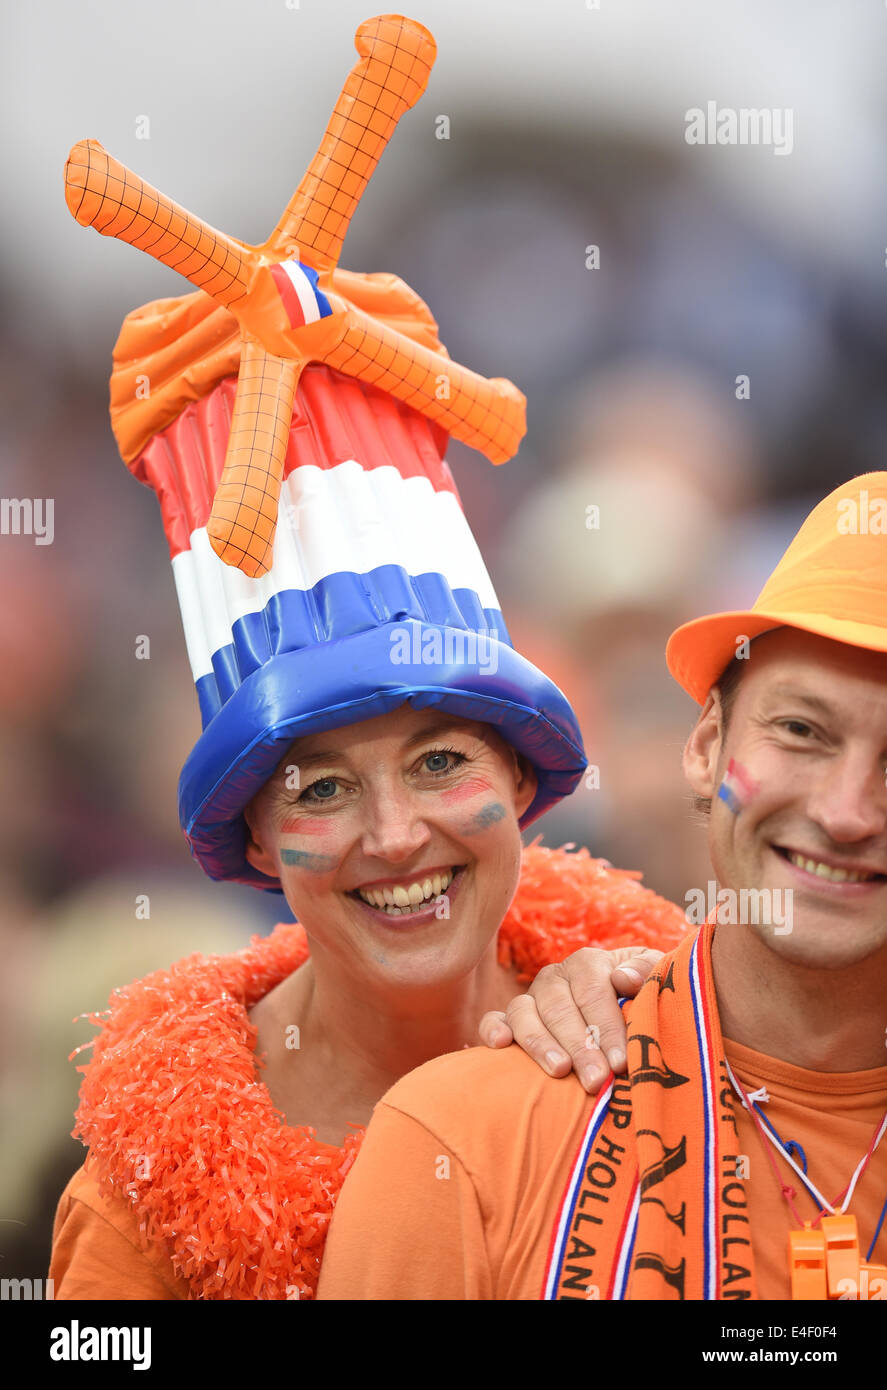 Sao Paulo, Brazil. 09th July, 2014. Supporters of the Netherlands cheer before the FIFA World Cup 2014 semi-final soccer match between the Netherlands and Argentina at the Arena Corinthians in Sao Paulo, Brazil, 09 July 2014. Photo: Marius Becker/dpa/Alamy Live News Stock Photo